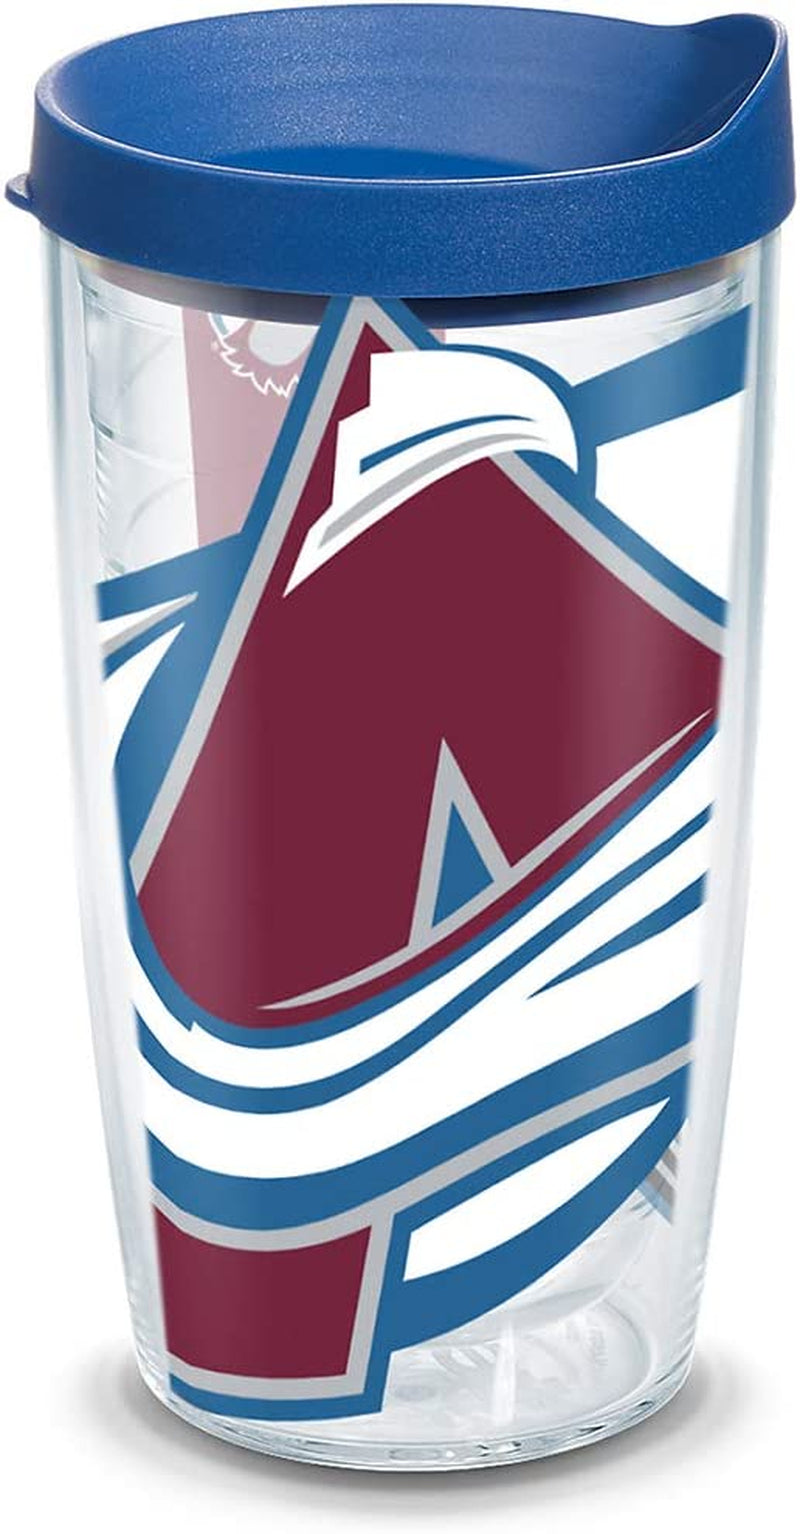 Tervis Made in USA Double Walled NHL Colorado Avalanche Insulated Tumbler Cup Keeps Drinks Cold & Hot, 24Oz, Colossal Home & Garden > Kitchen & Dining > Tableware > Drinkware Tervis Colossal 16oz 